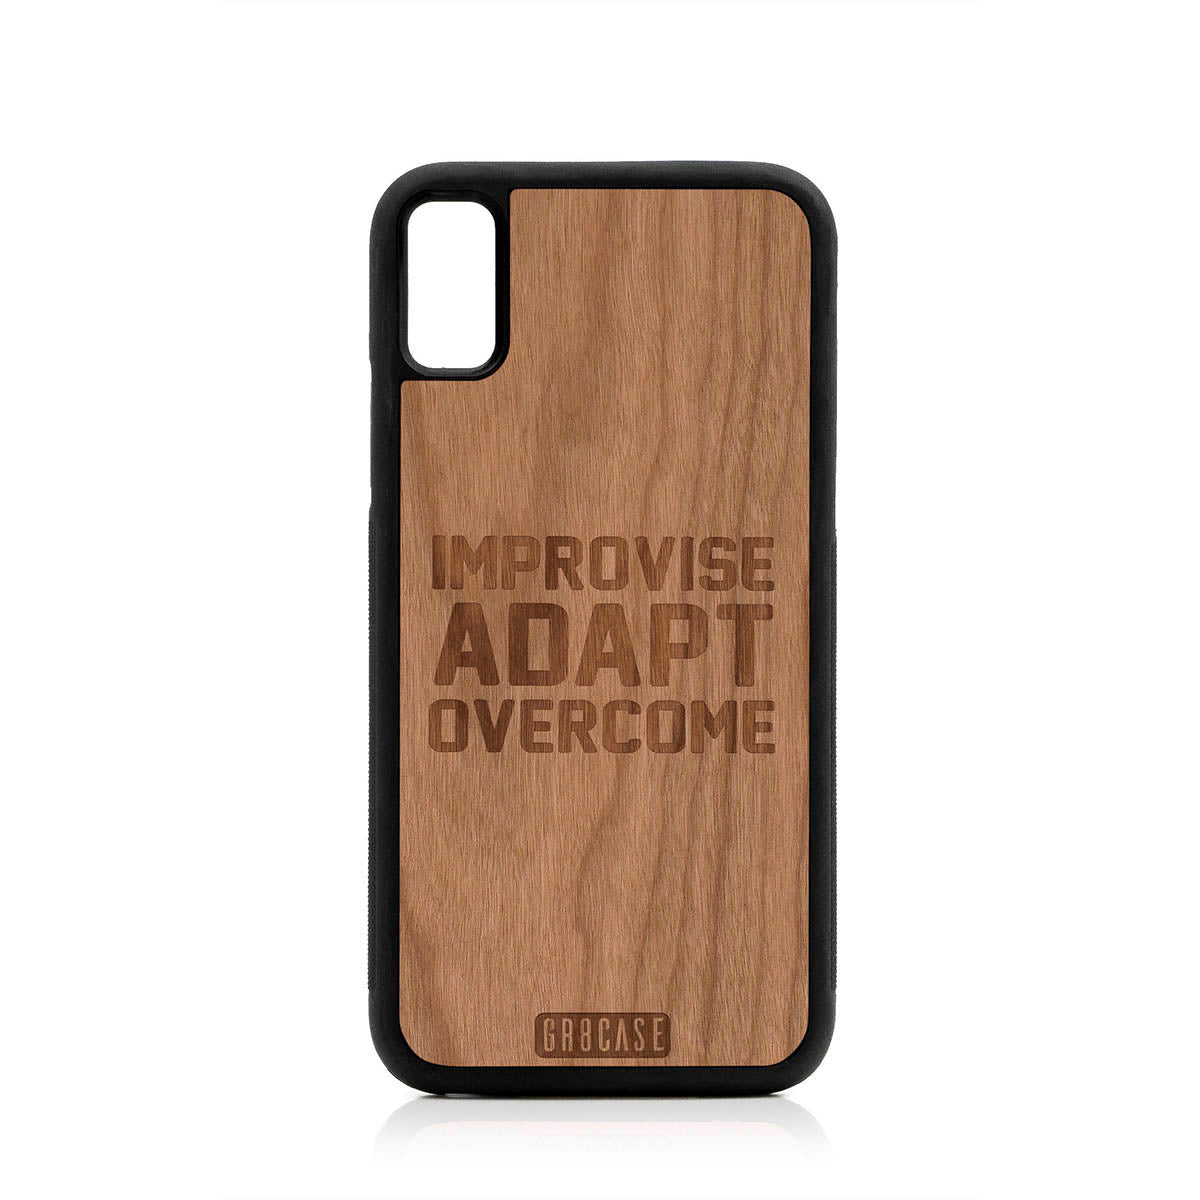 Improvise Adapt Overcome Design Wood Case For iPhone XS Max